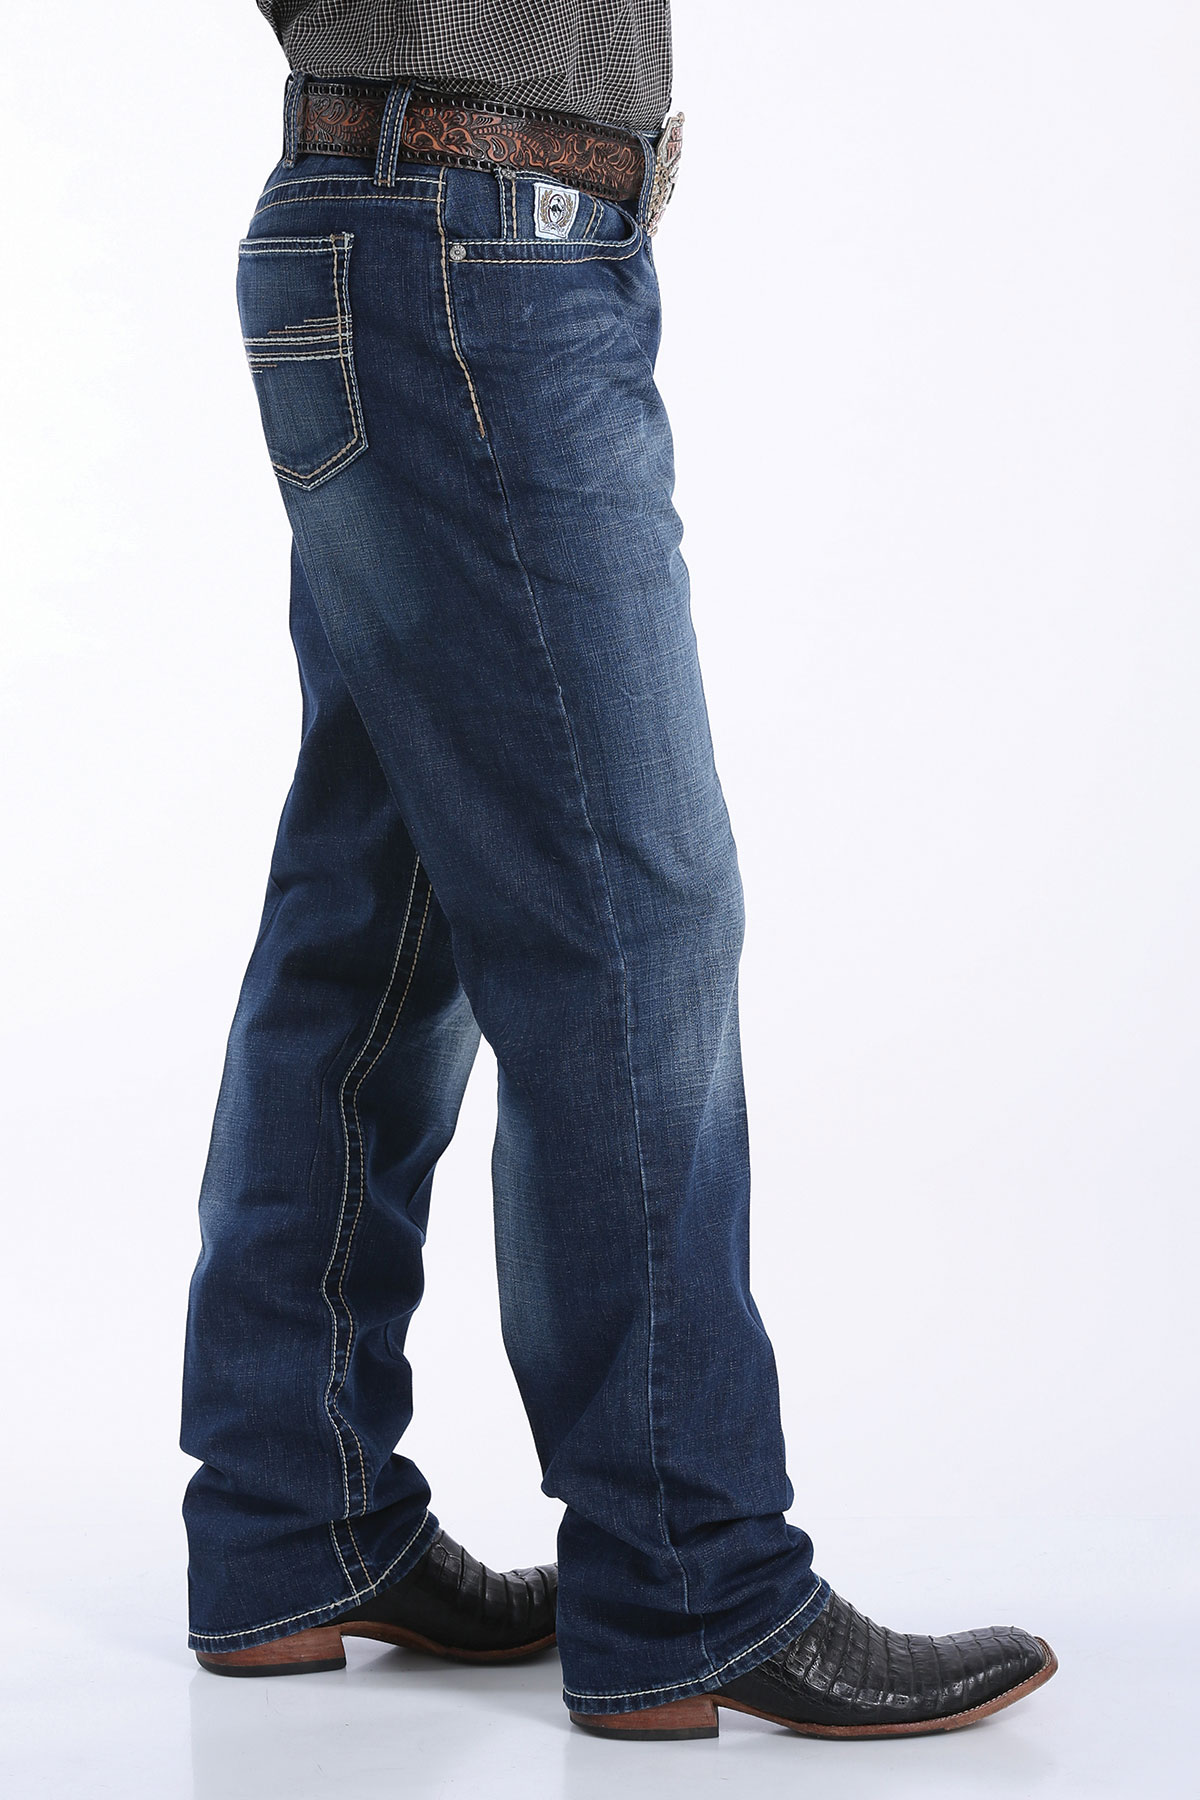 cinch white label performance jeans